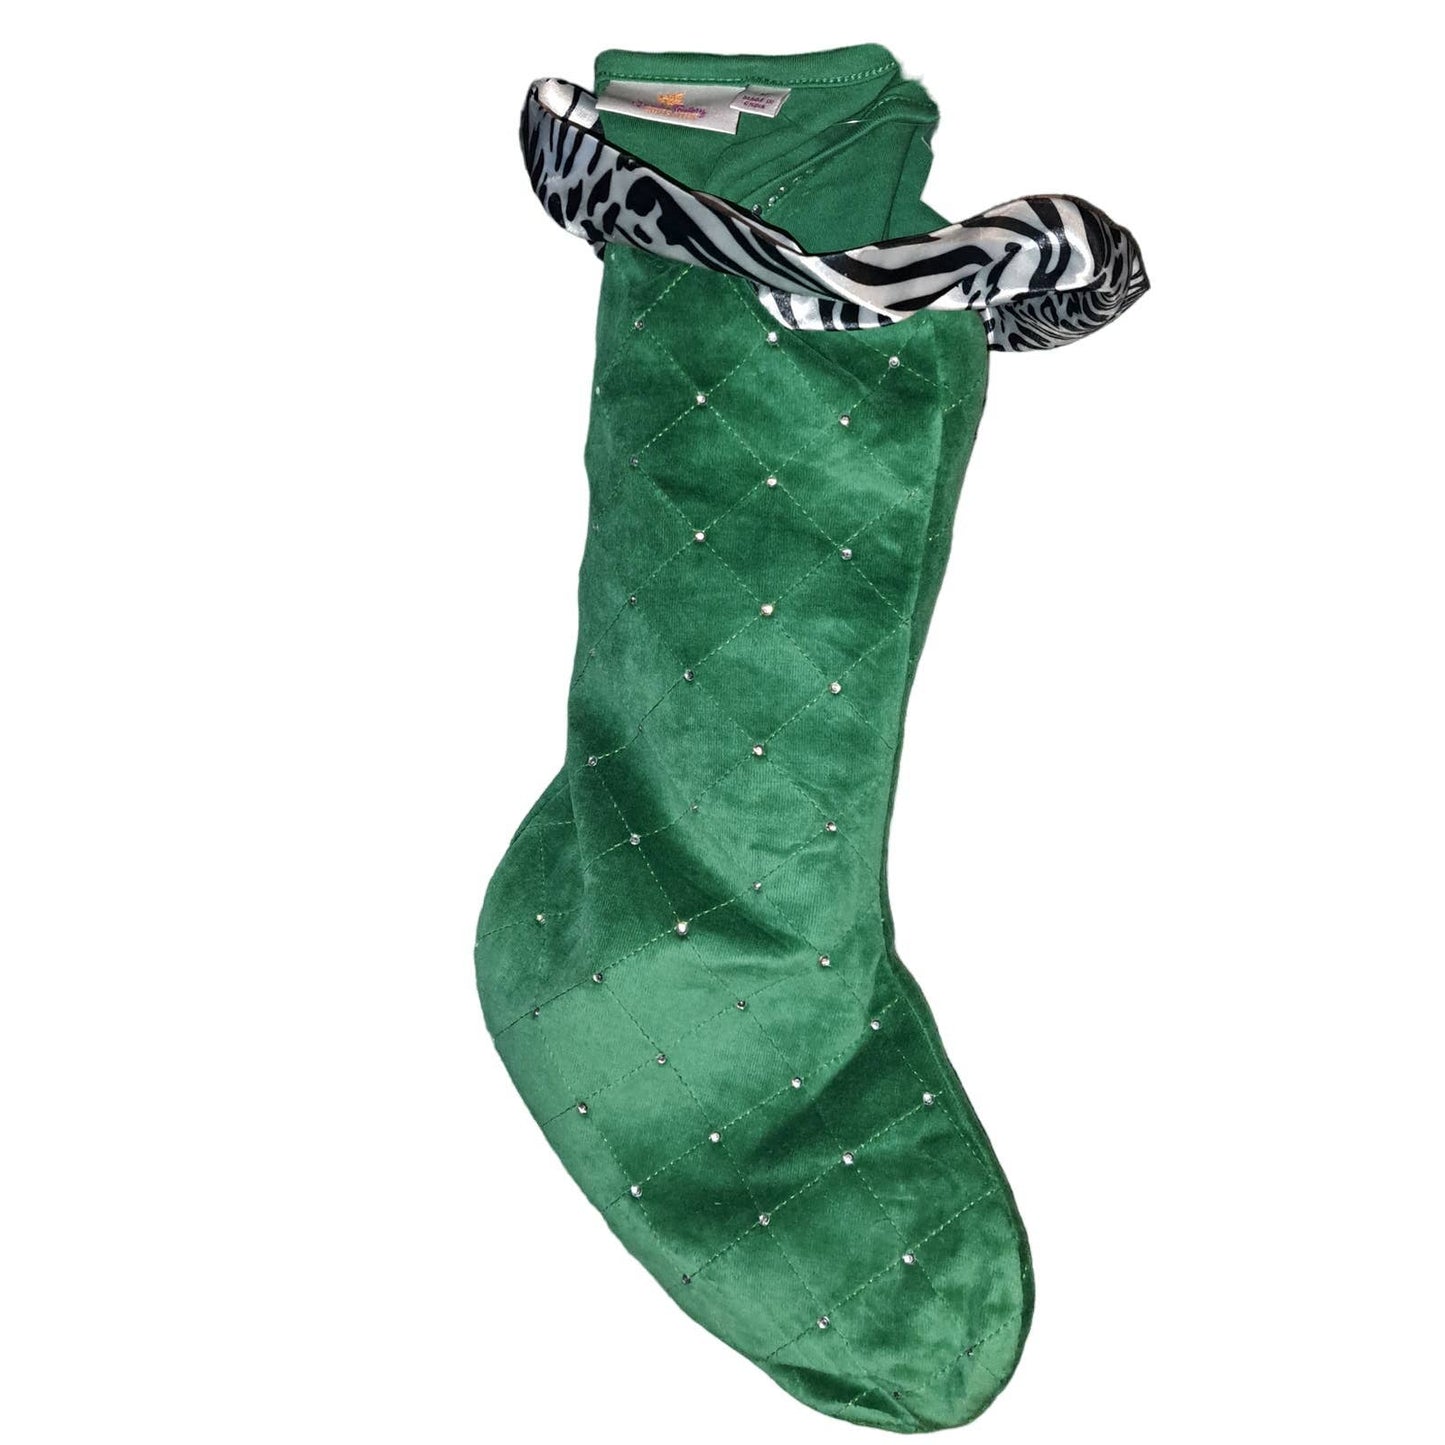 NWT- Ready for Gifting! Sz M Quaker Factory Mrs Claus Green & matching Stocking